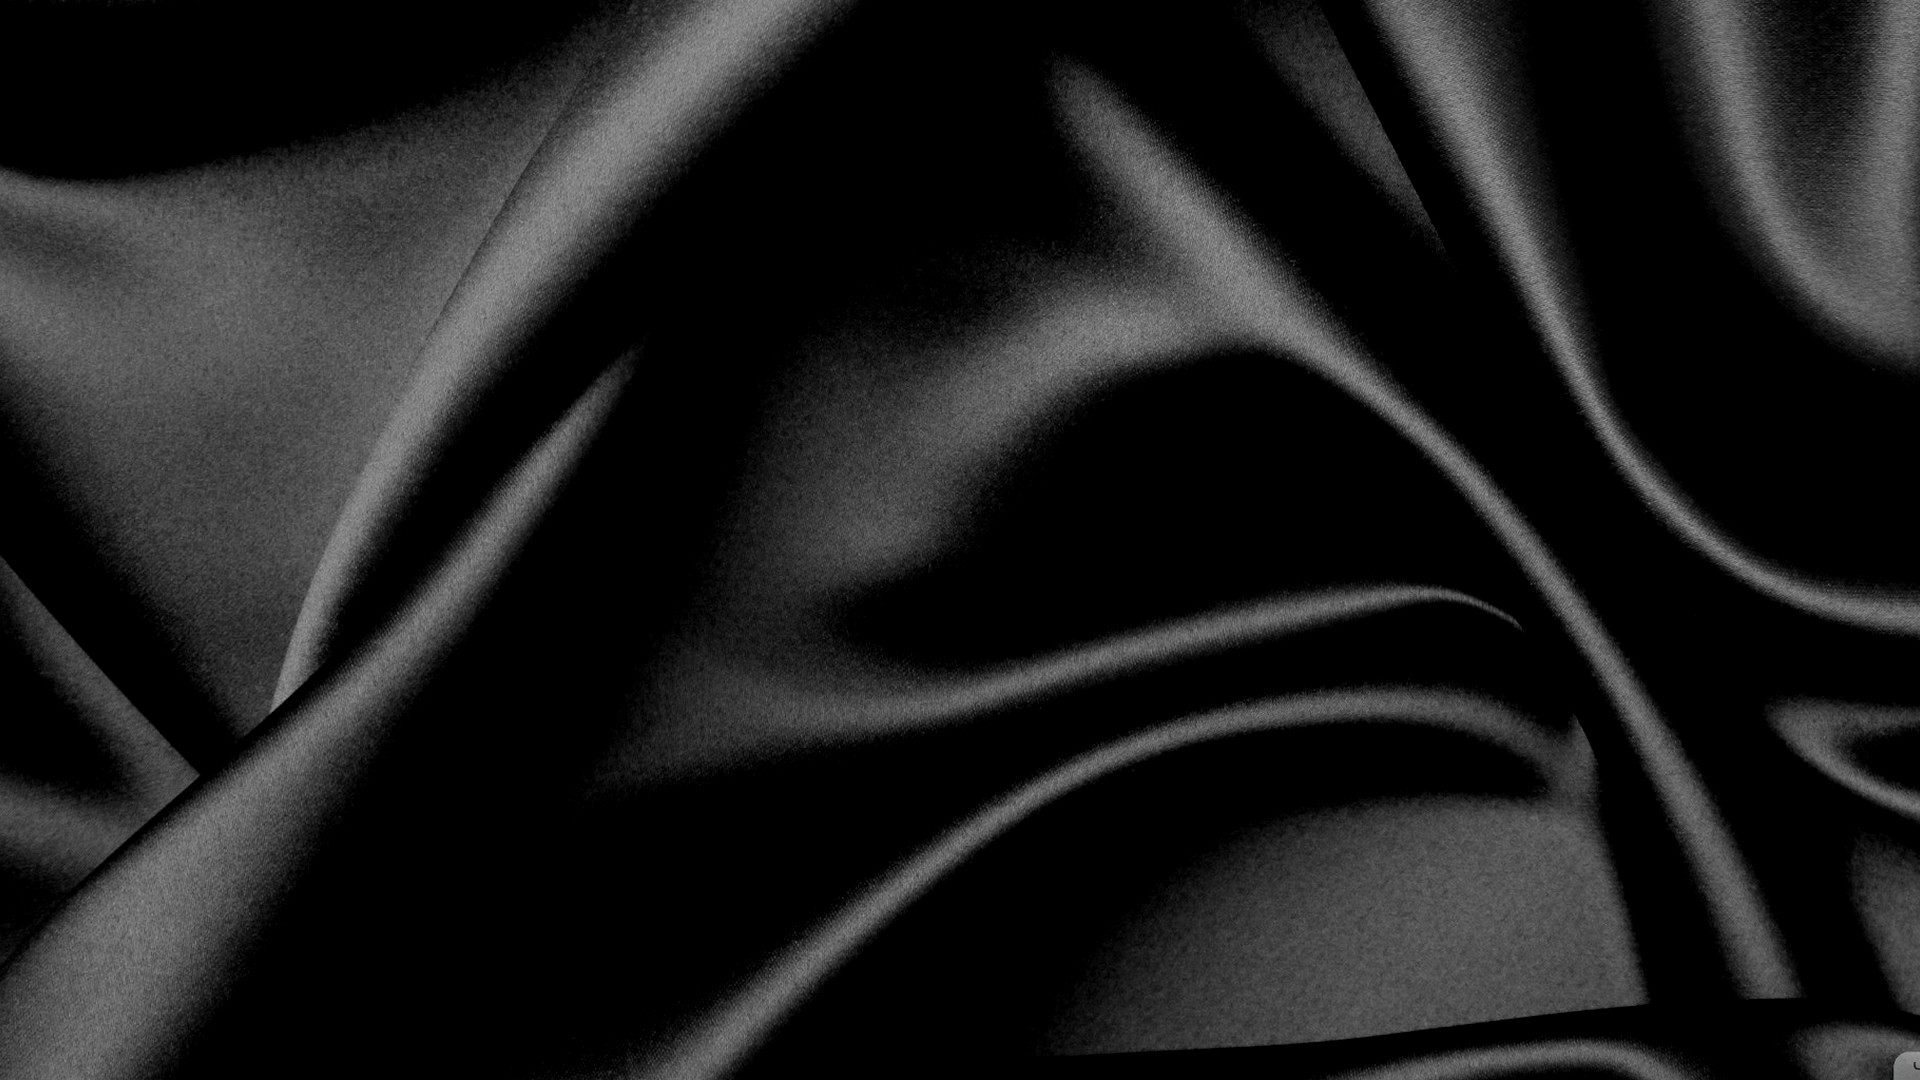 Black Silk Desktop Wallpaper With high-resolution 1920X1080 pixel. You can use this wallpaper for your Windows and Mac OS computers as well as your Android and iPhone smartphones